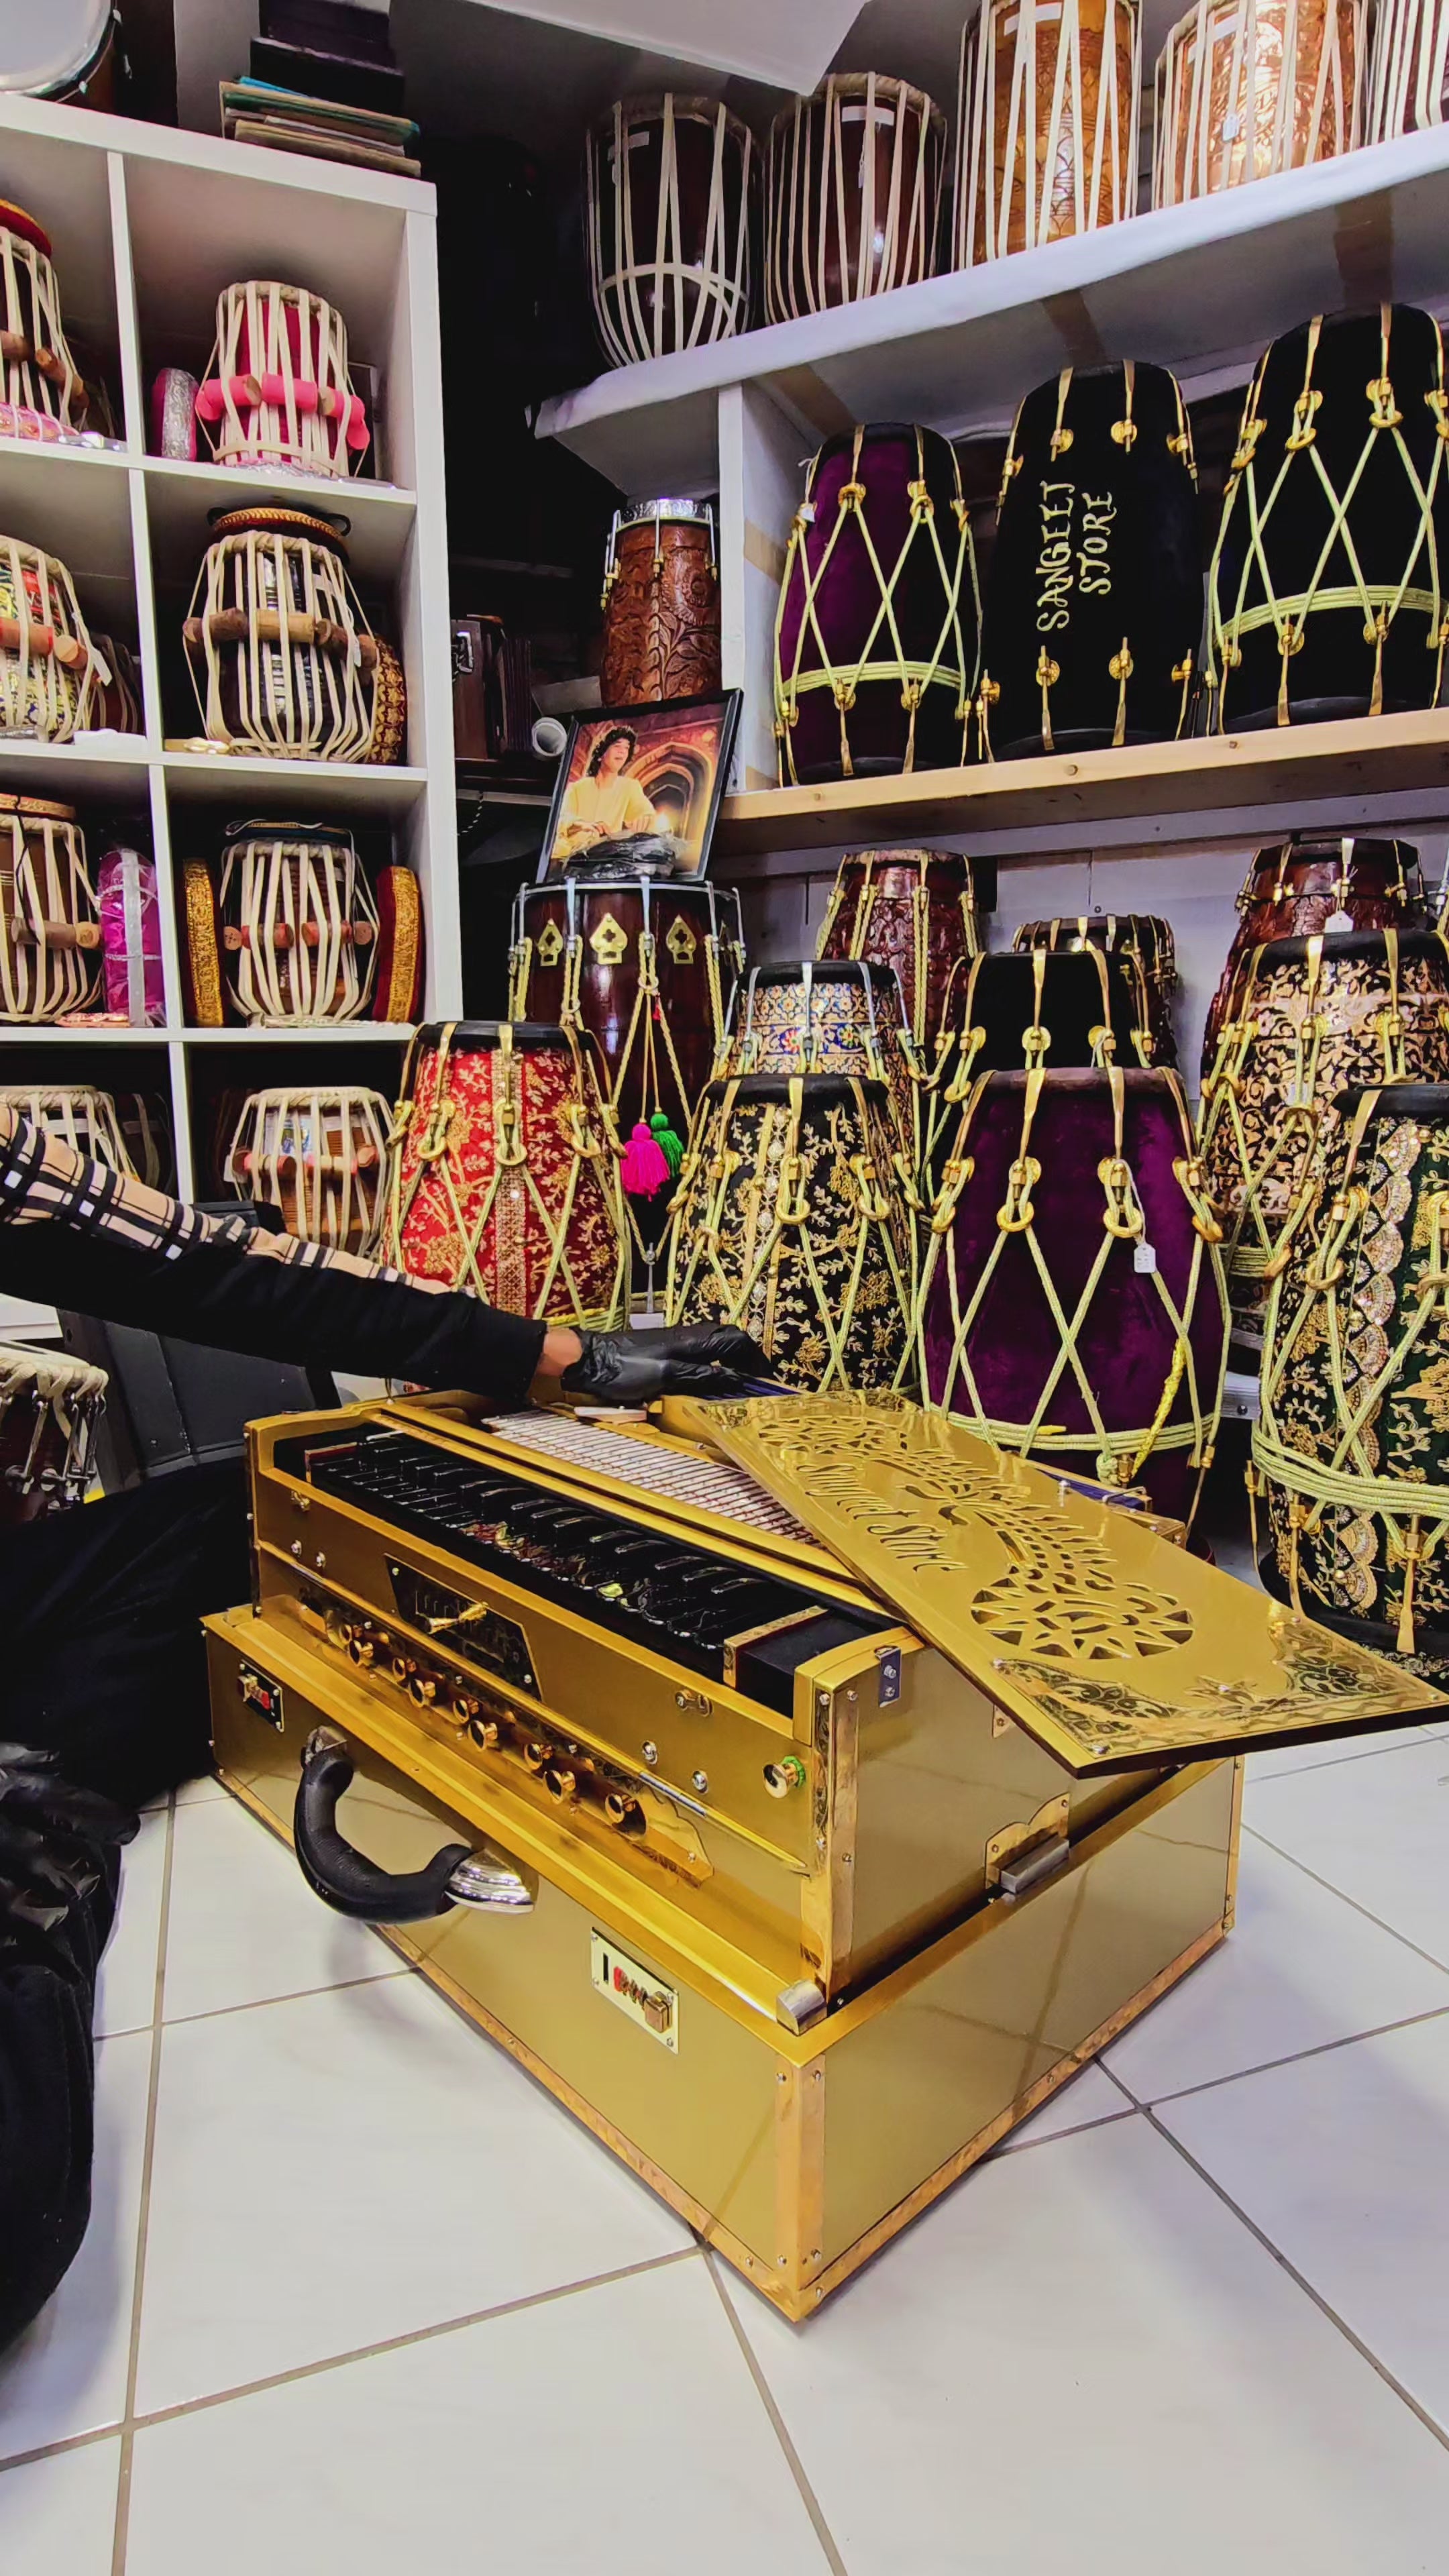 Divine Symphony: Golden Enigma 3 Reed BMF 9 Scale-Changer Sangeet Store Harmonium with Ebony Keys and Opulent Golden Accents